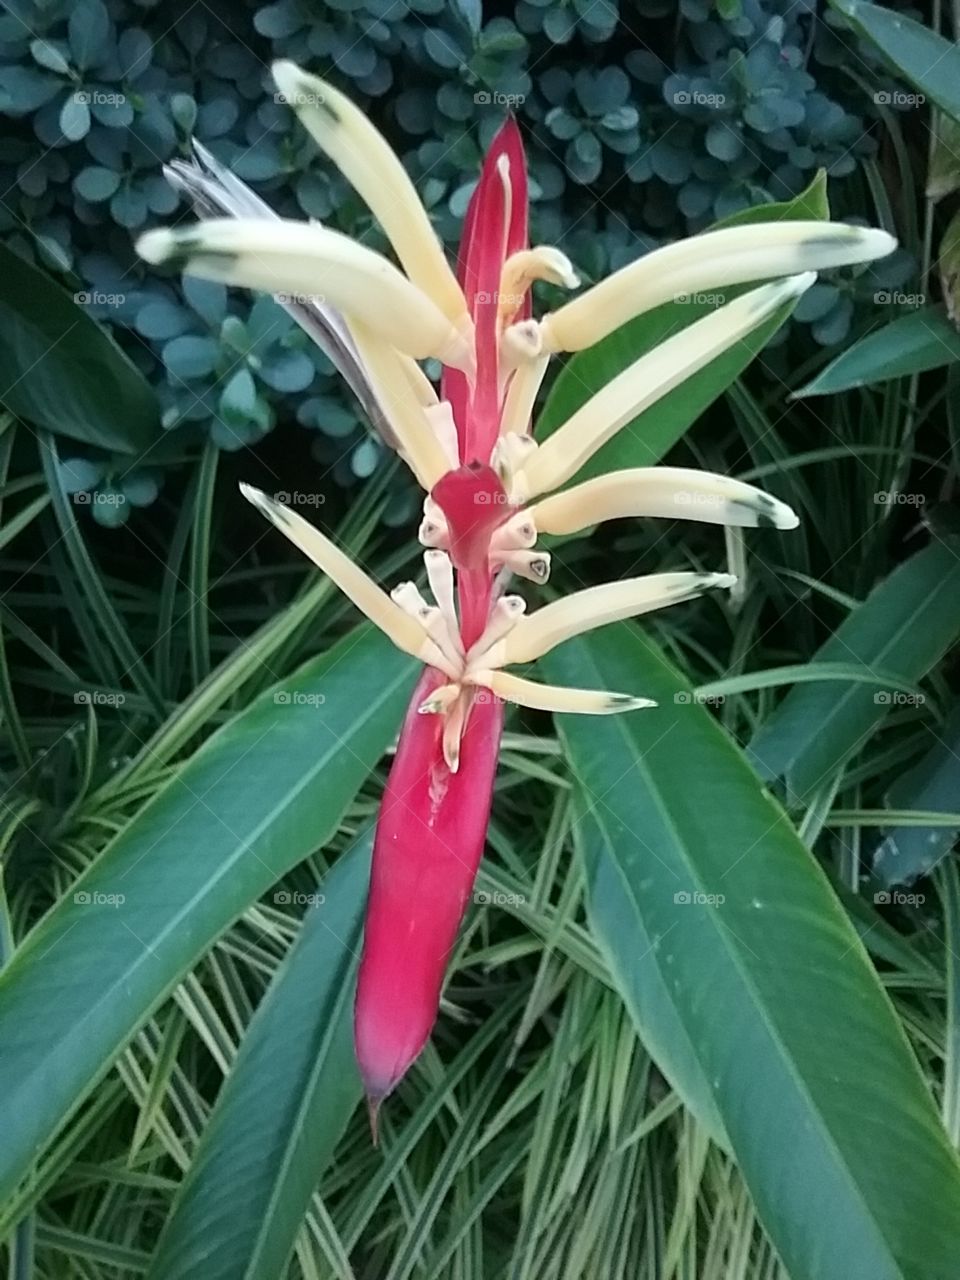 A tropical flower that opens widely to your eyes.